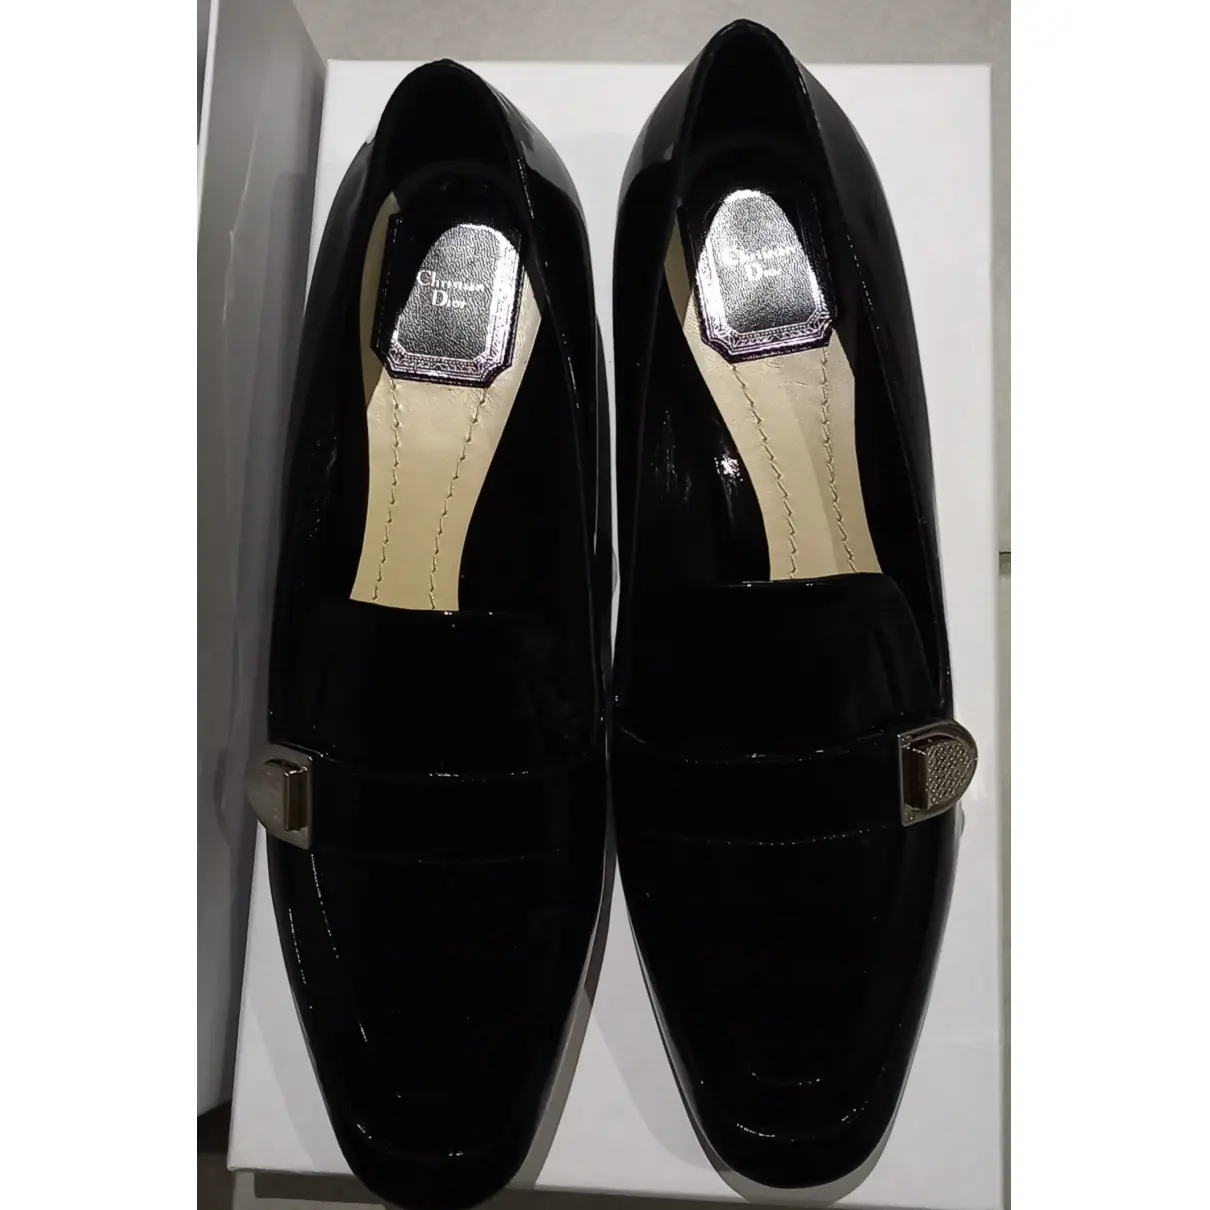 Buy Dior Patent leather flats online